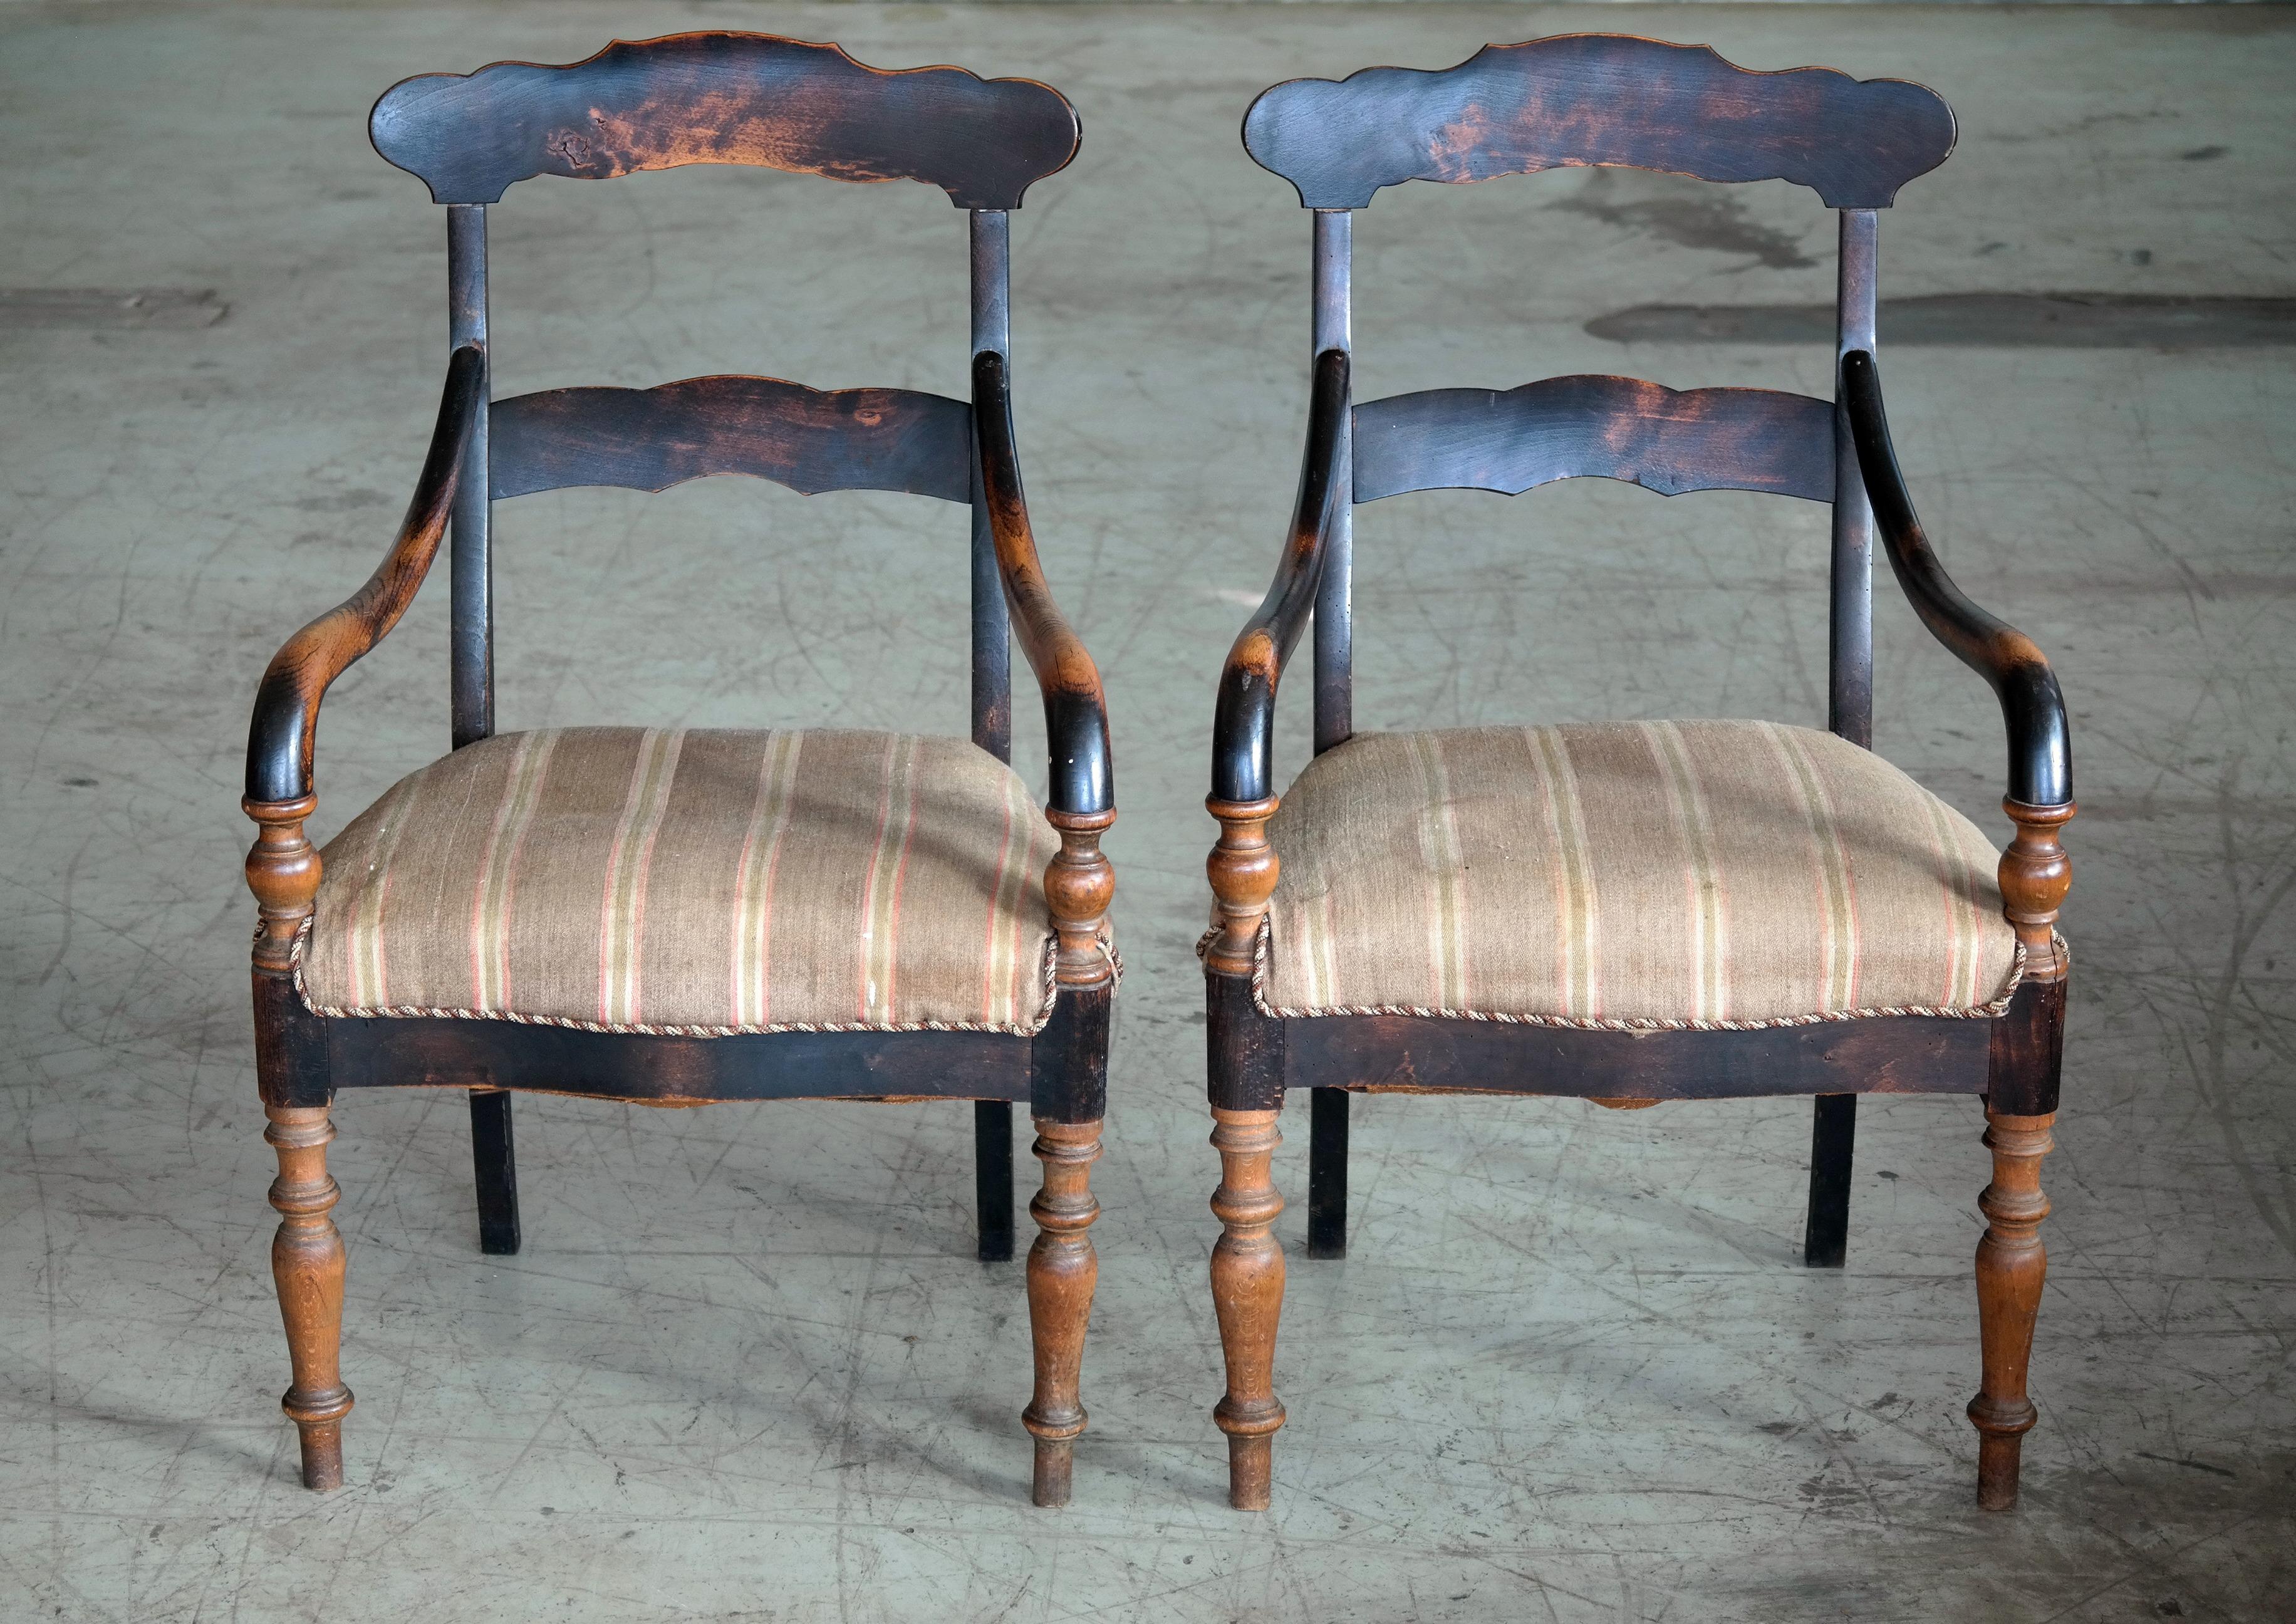 Great pair of country style armchairs made in Denmark in the early part of the 20th century. Hand carved from solid oak and stained. Over time the chairs have achieved an absolutely remarkable patina showing wear the to armrests. The fabric is worn